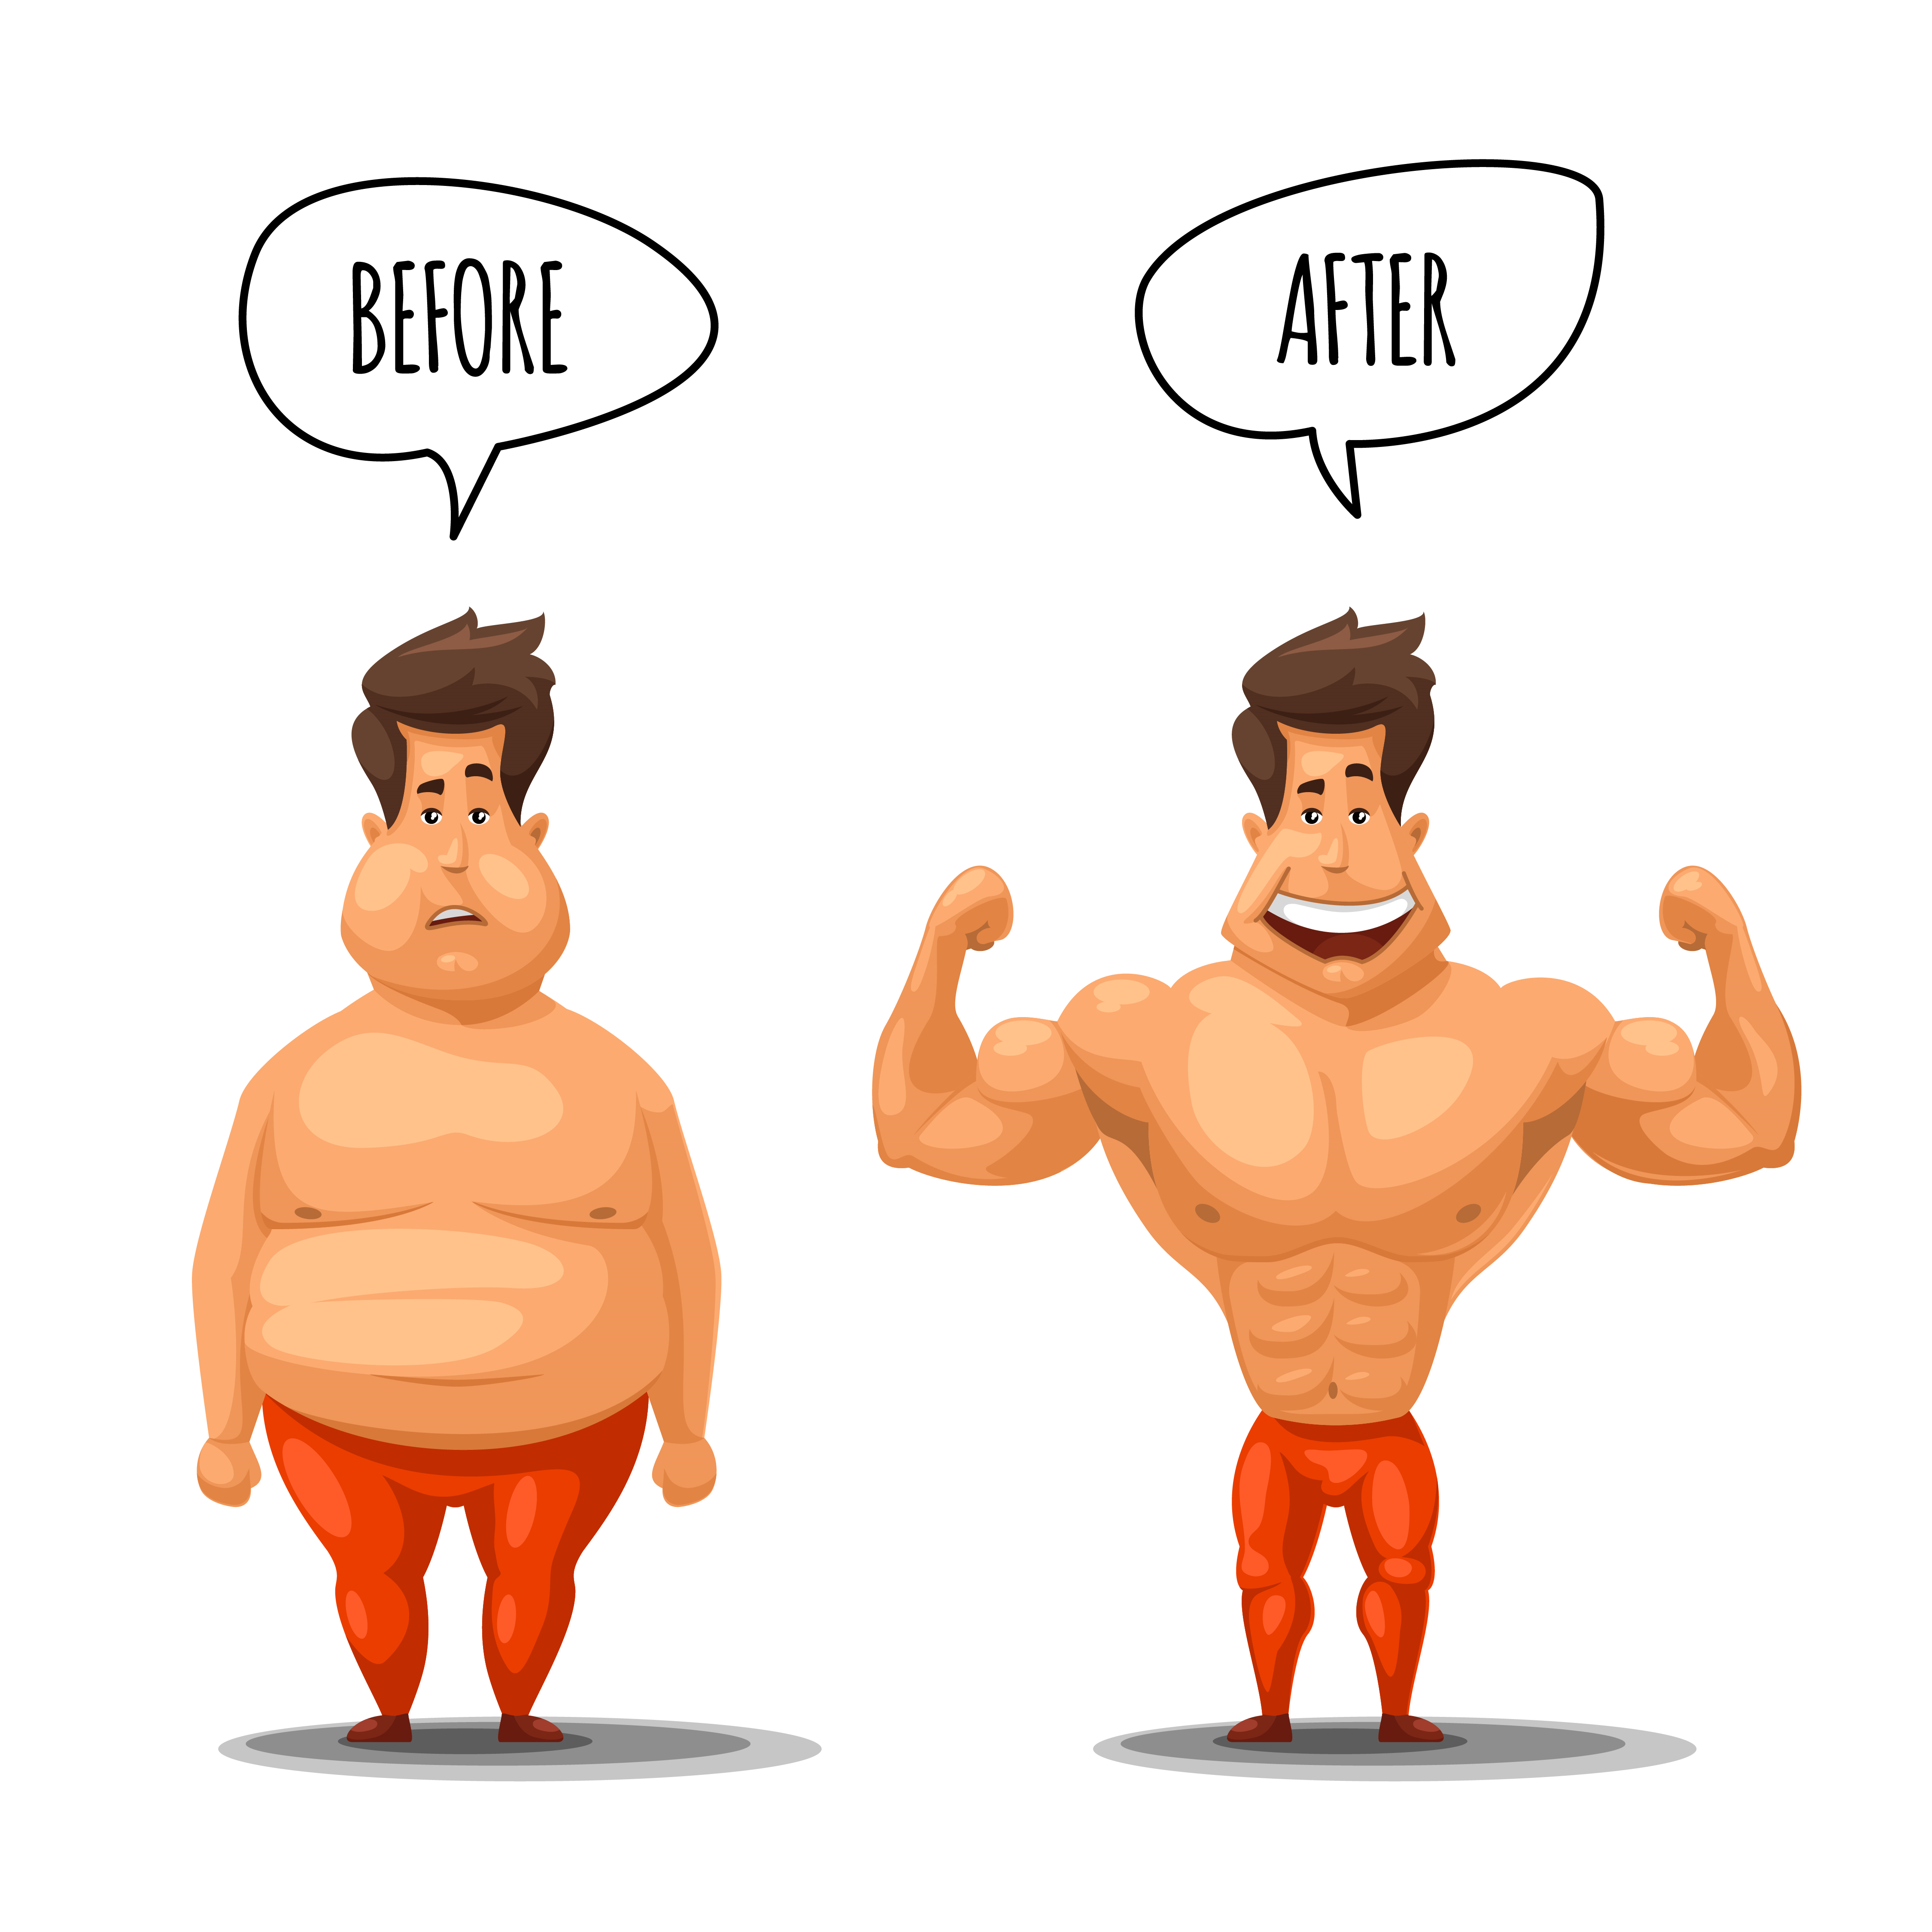 1607.m00.i125.n006.P.c25.426934942 Weight loss. Man before and after diet vector illustration